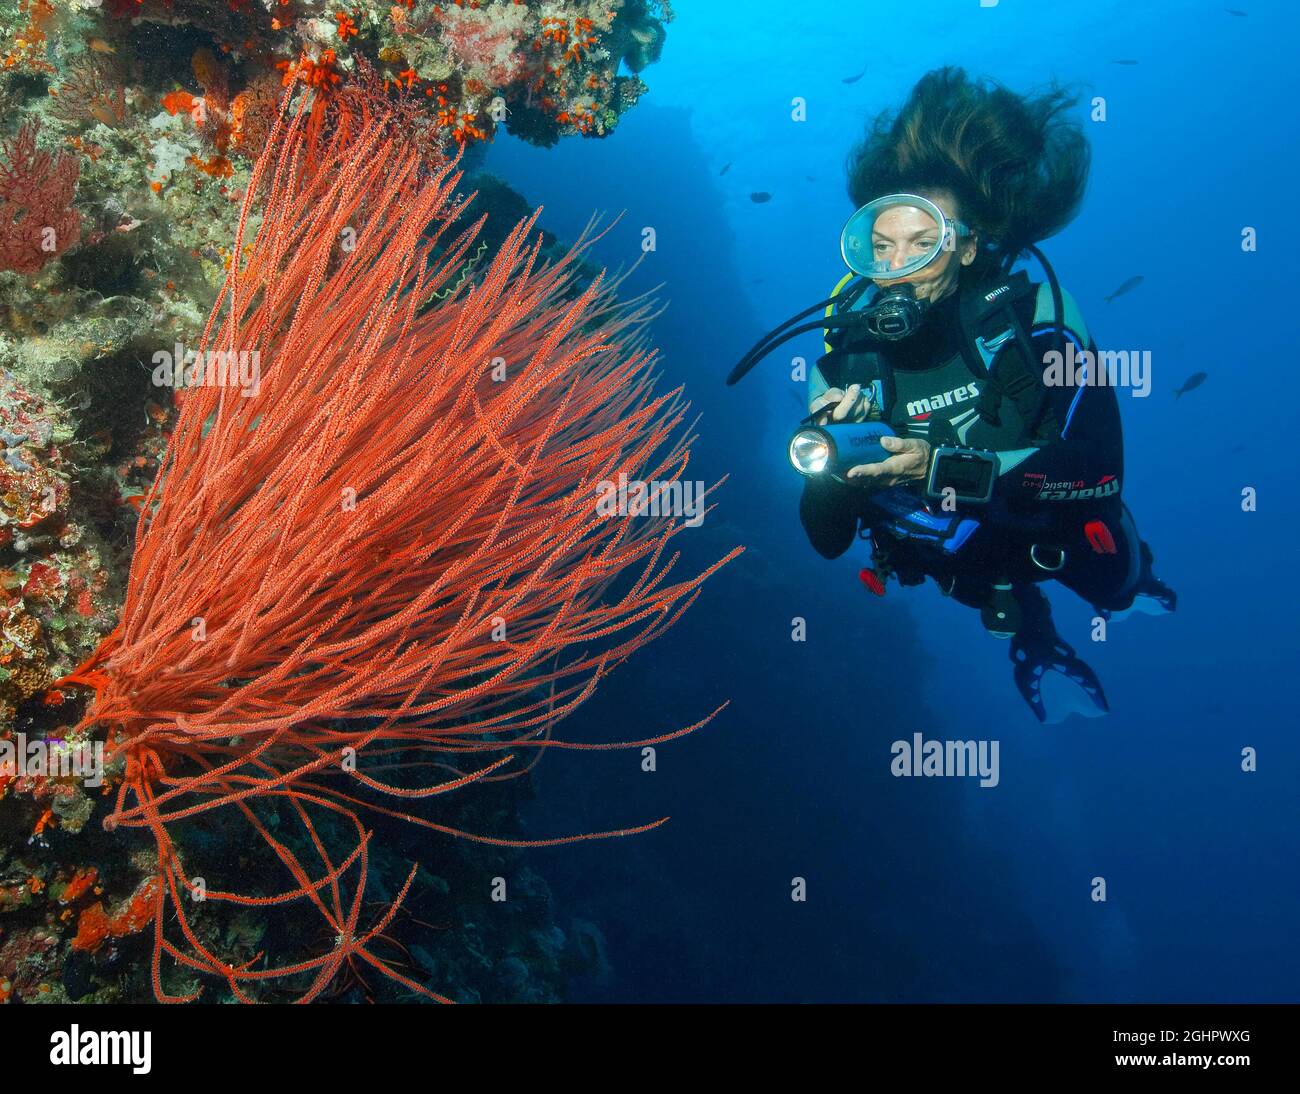 Diver looking at and illuminating Red whip coral (Ellisella ceratophyta), Pacific Ocean, Palau Stock Photo